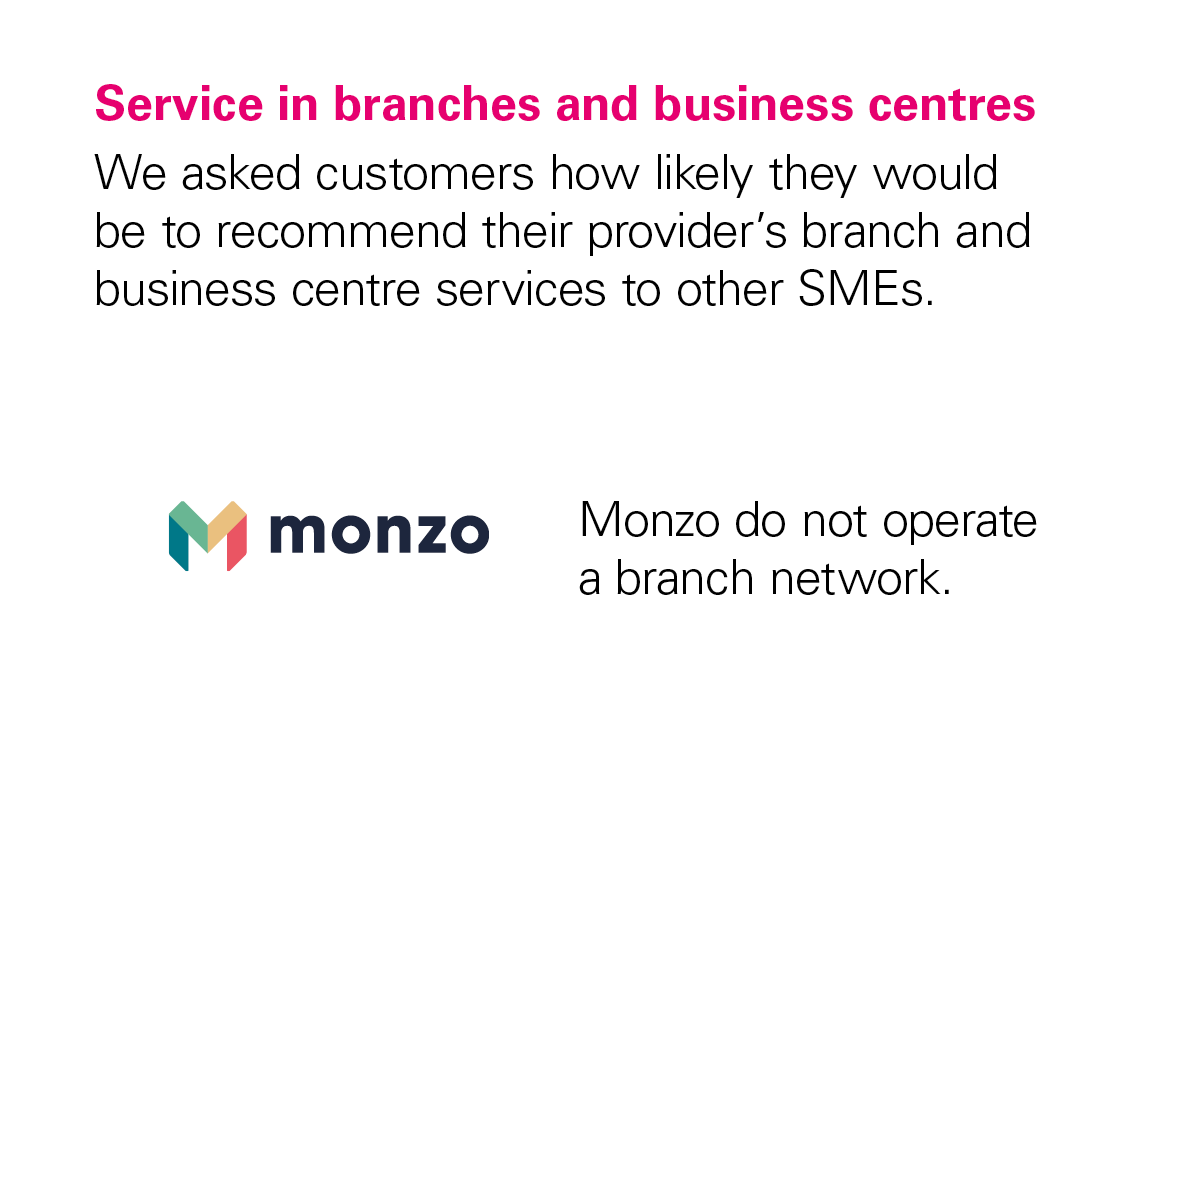 Image showing that Monzo didn't receive a score from the CMA for the Services in Branches and Business Centres category because Monzo doesn't have any branches.